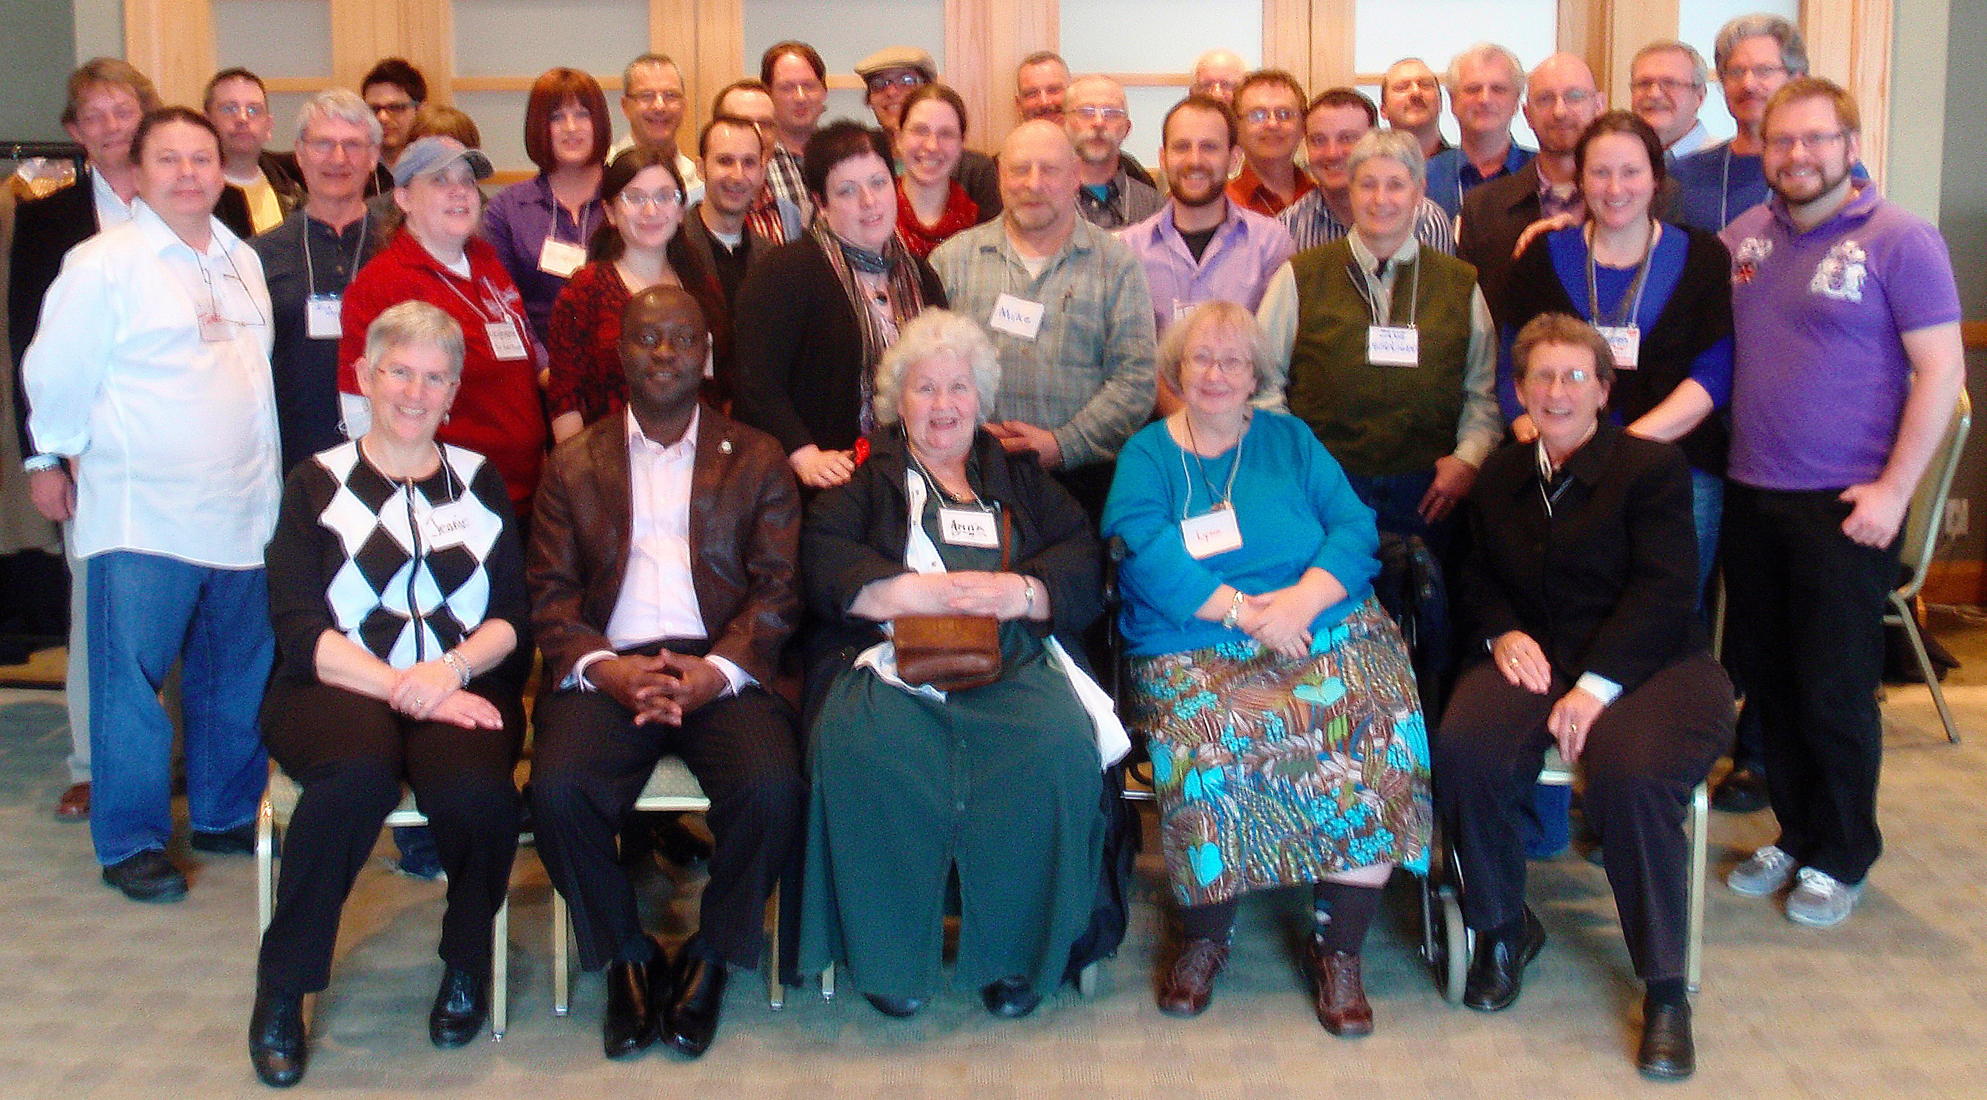 Participants in the 2011 Community Development Conference